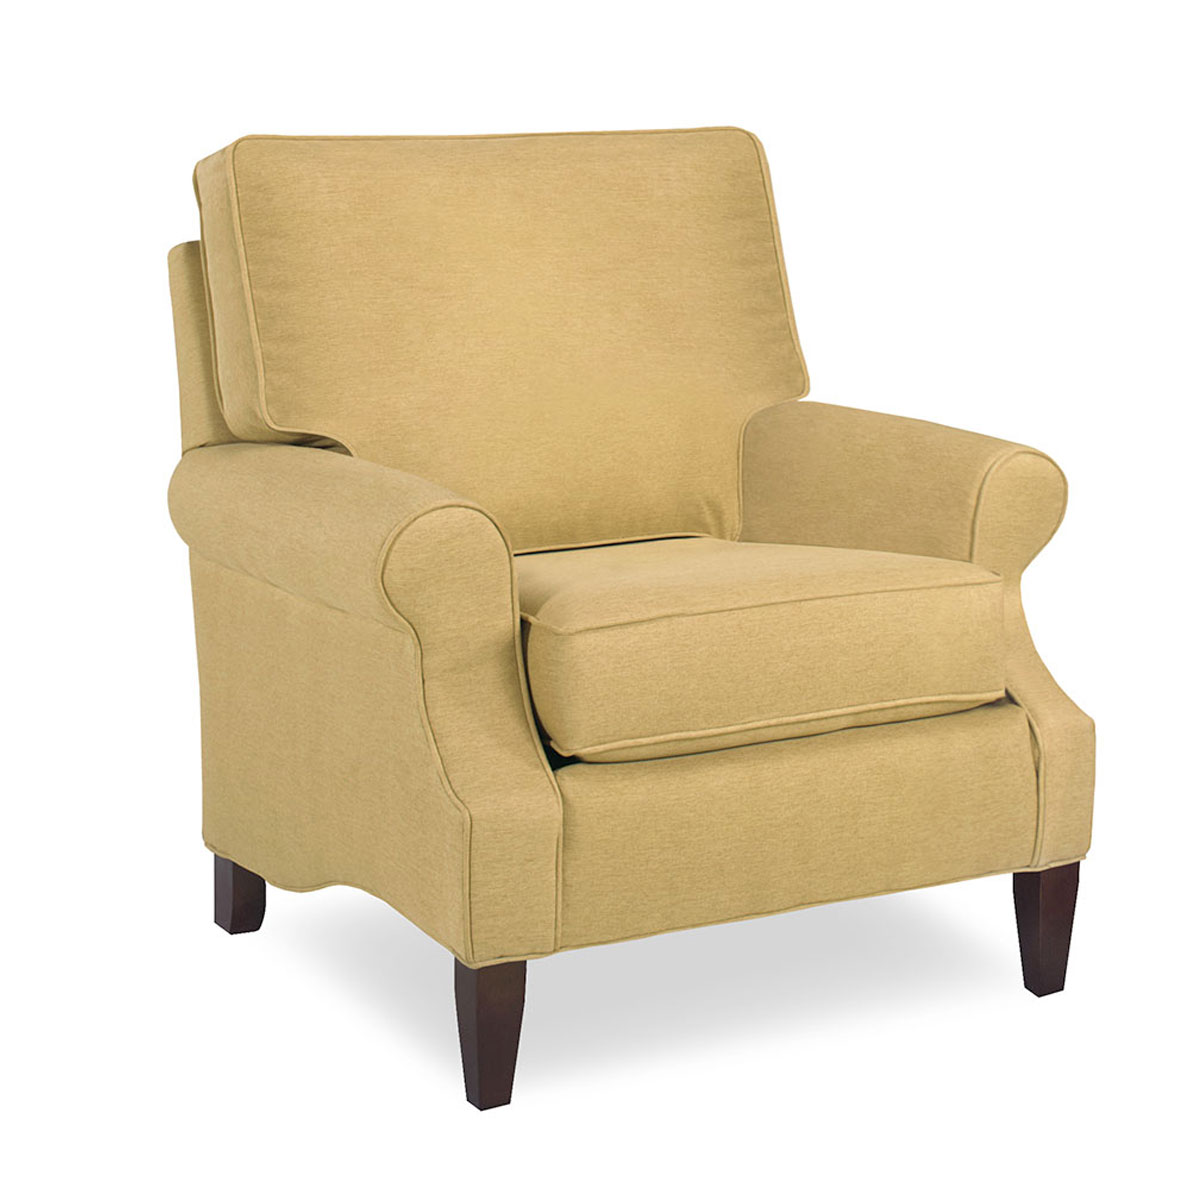 Temple Furniture 24685 Tiffany Chair